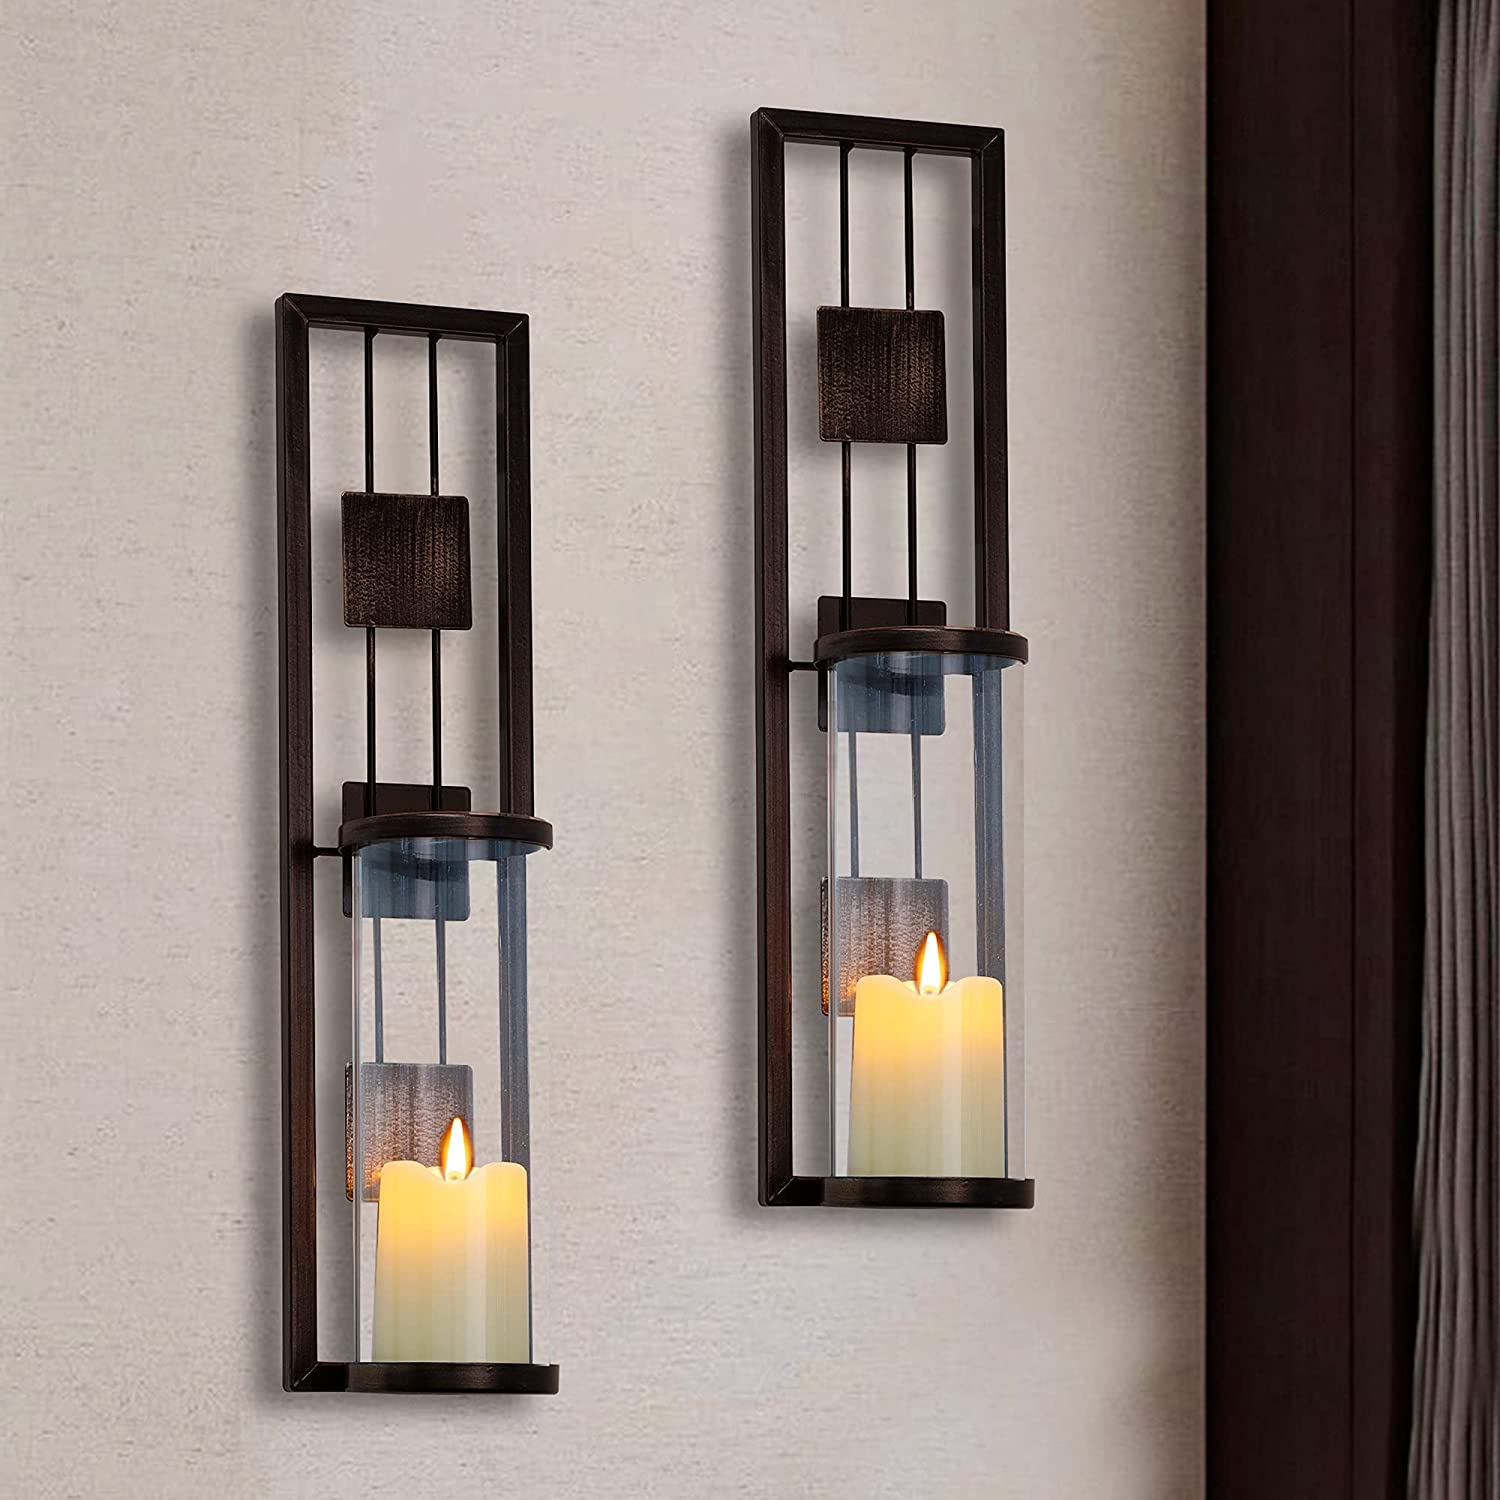 Shelving Solution Wall Sconce Candle Holder Metal Wall Decorations for Living Room, Bathroom, Dining Room, Set of 2